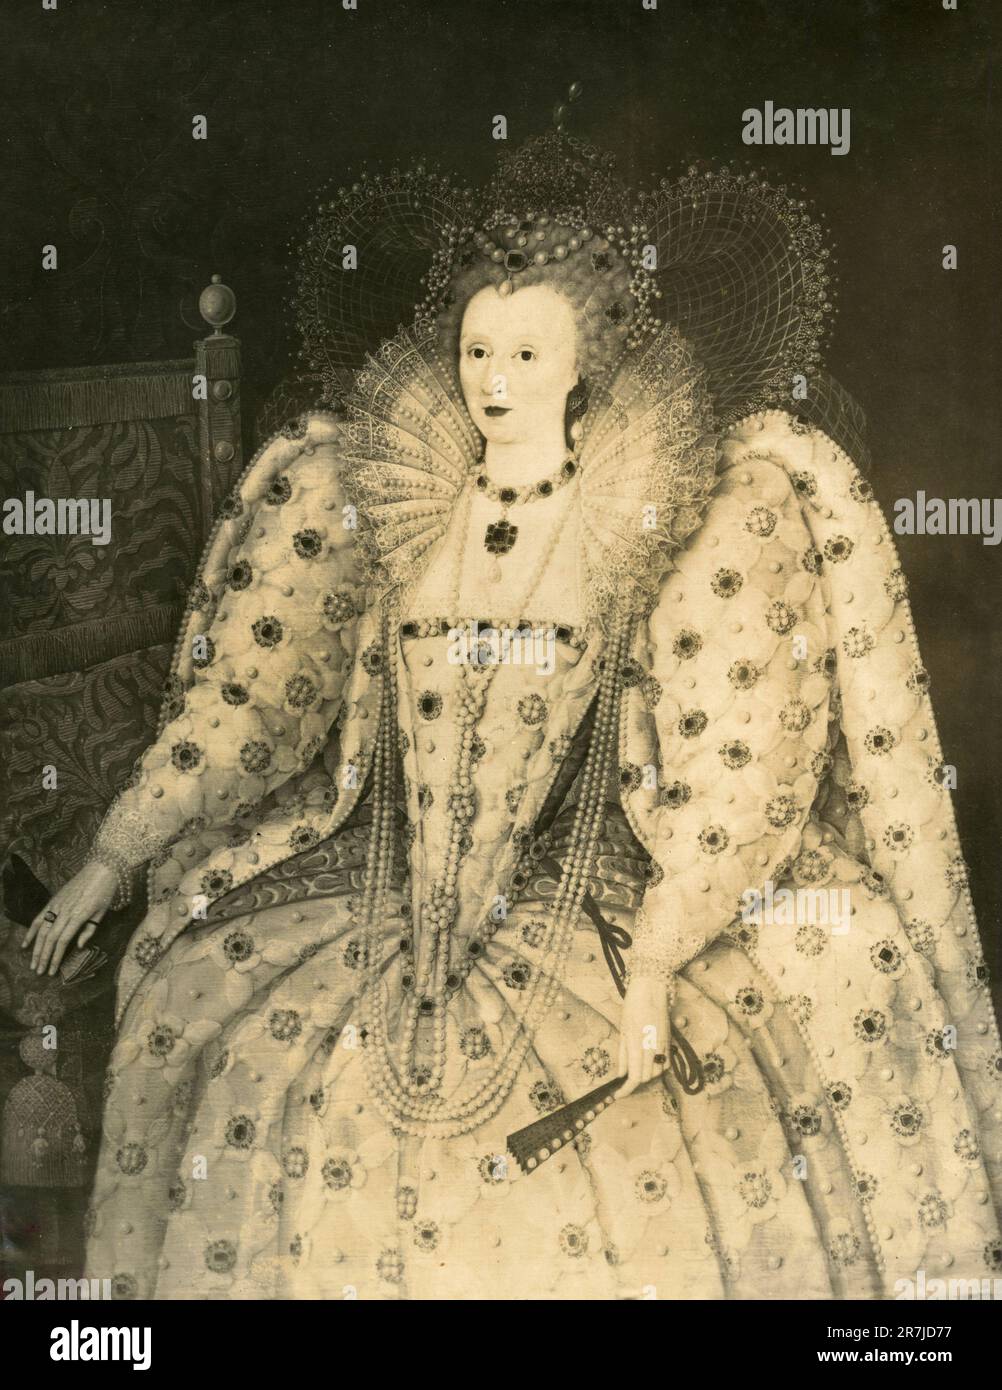 Portrait of Queen Elizabeth I of England, painting by British School 18th century, Pitti Gallery, Florence Italy 1900s Stock Photo